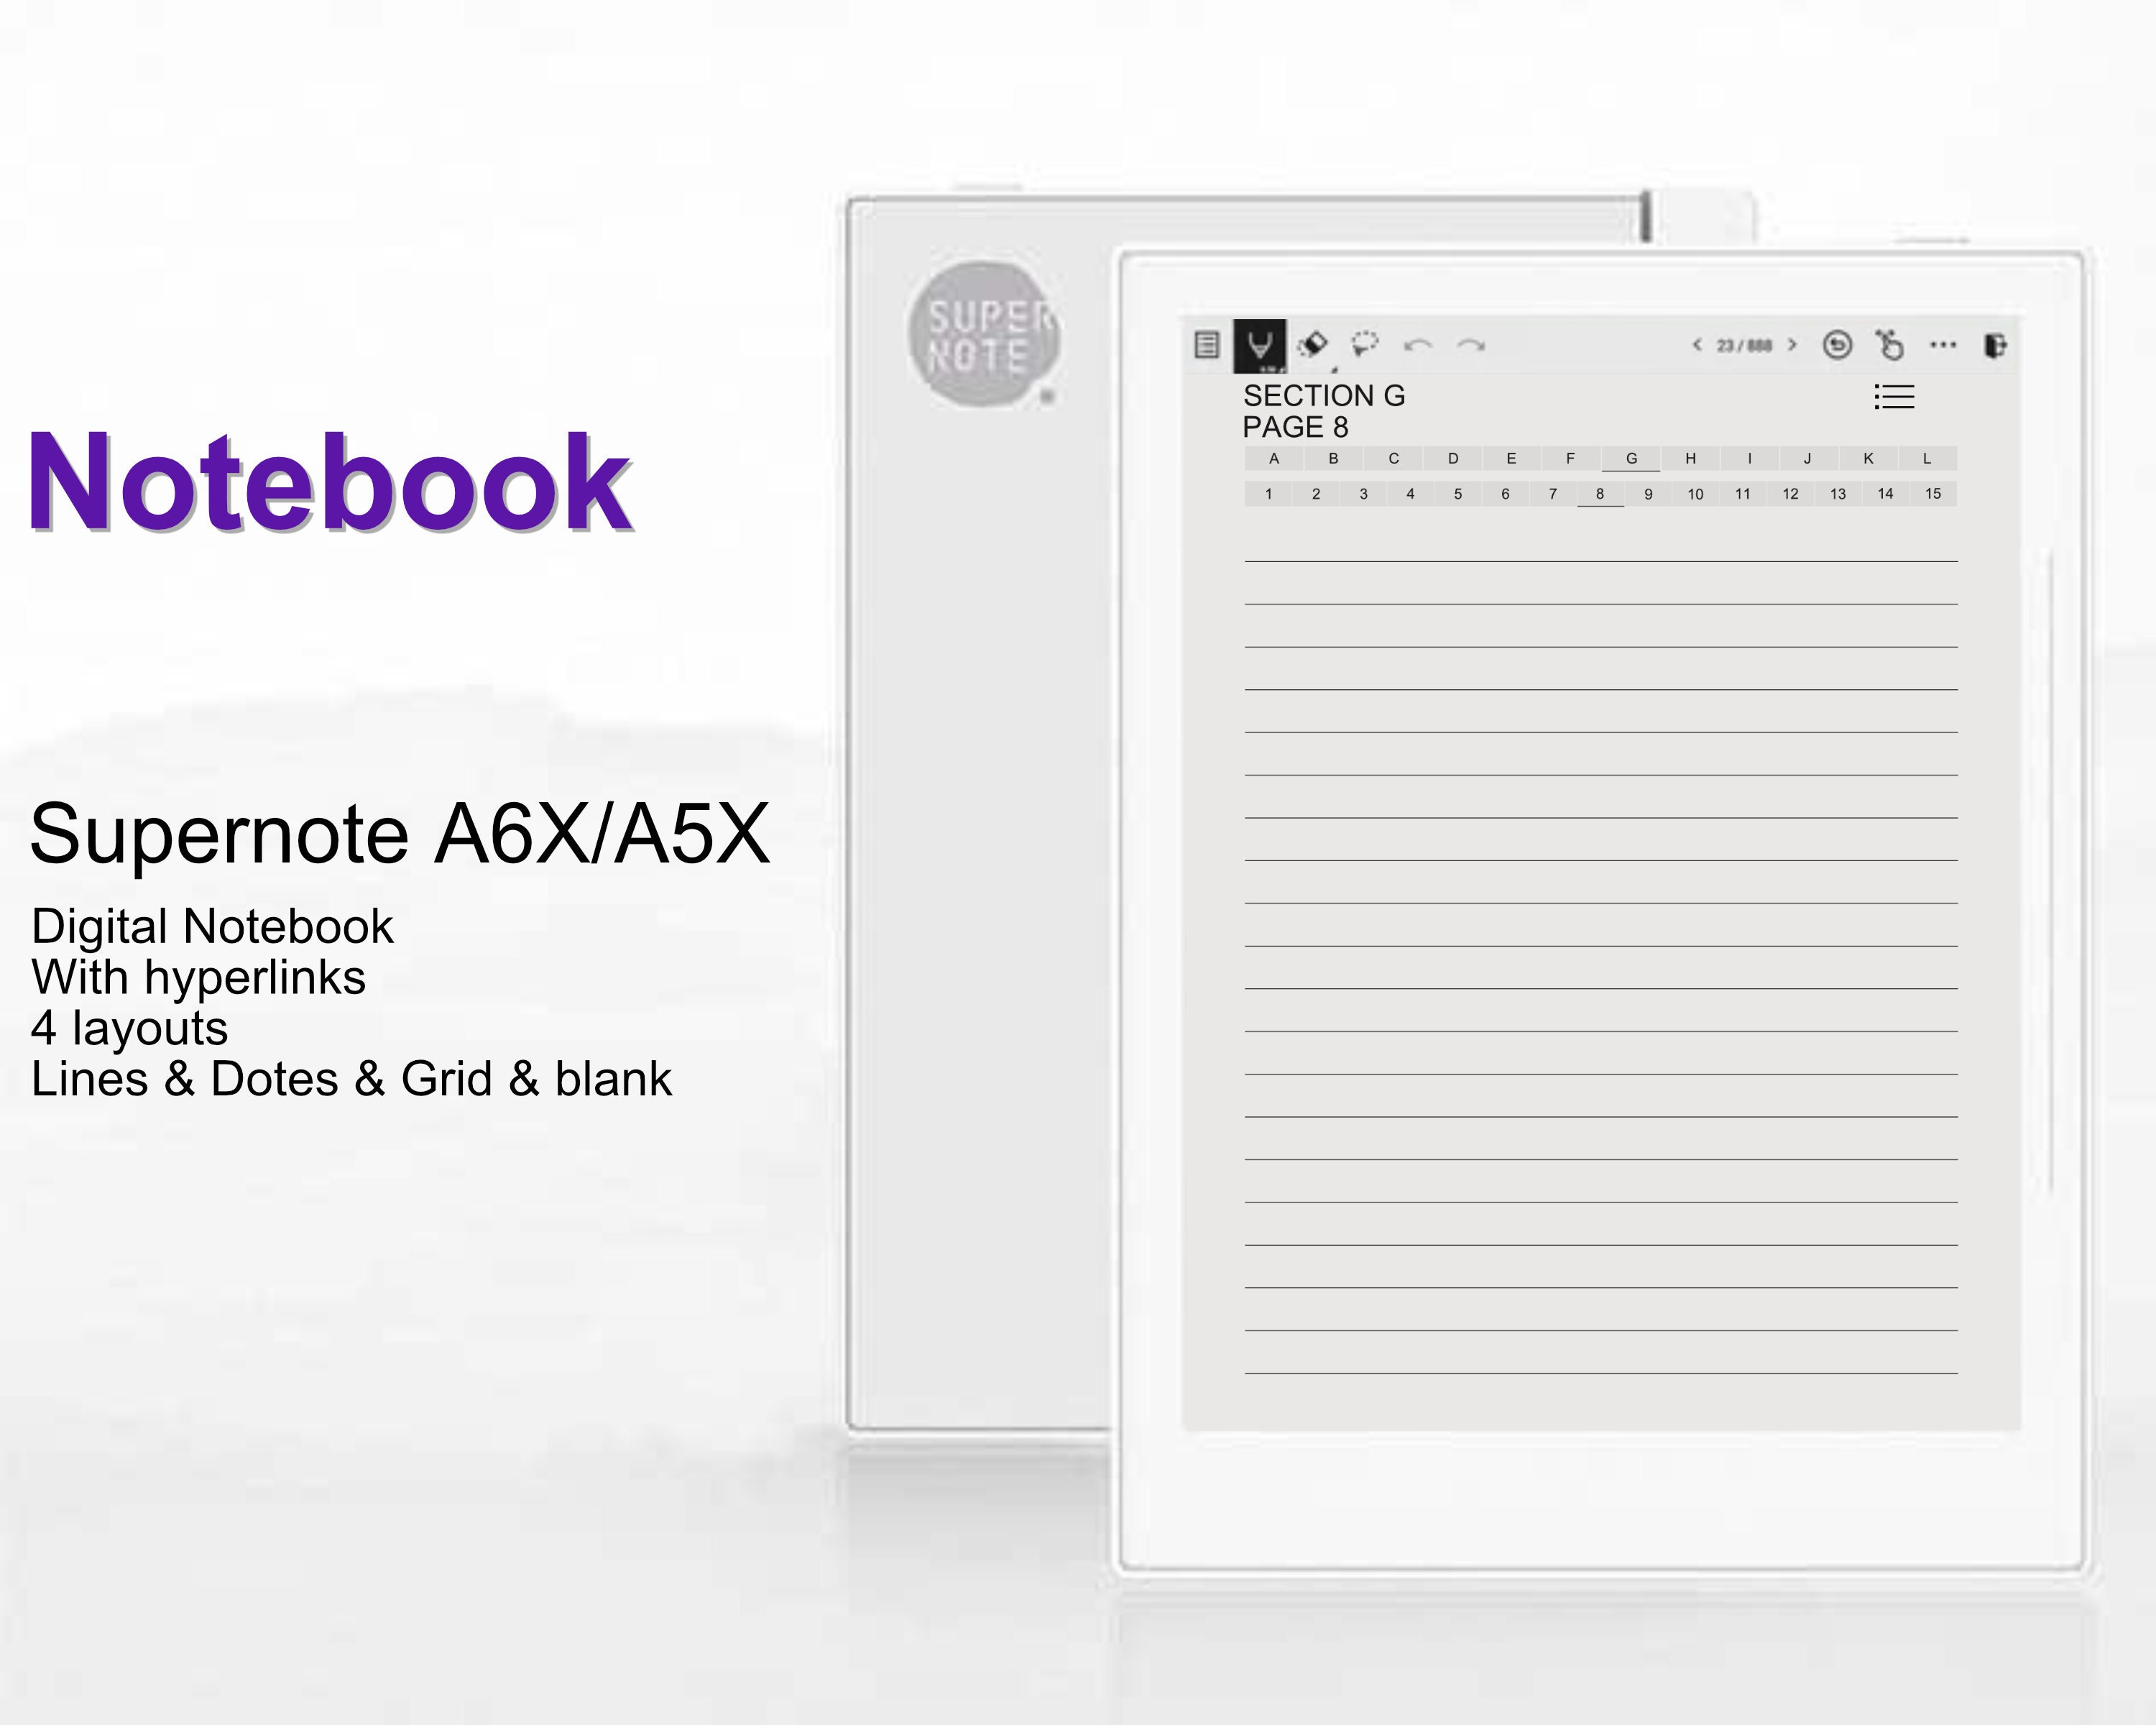 Supernote A5 X review · 3dtotal · Learn, Create